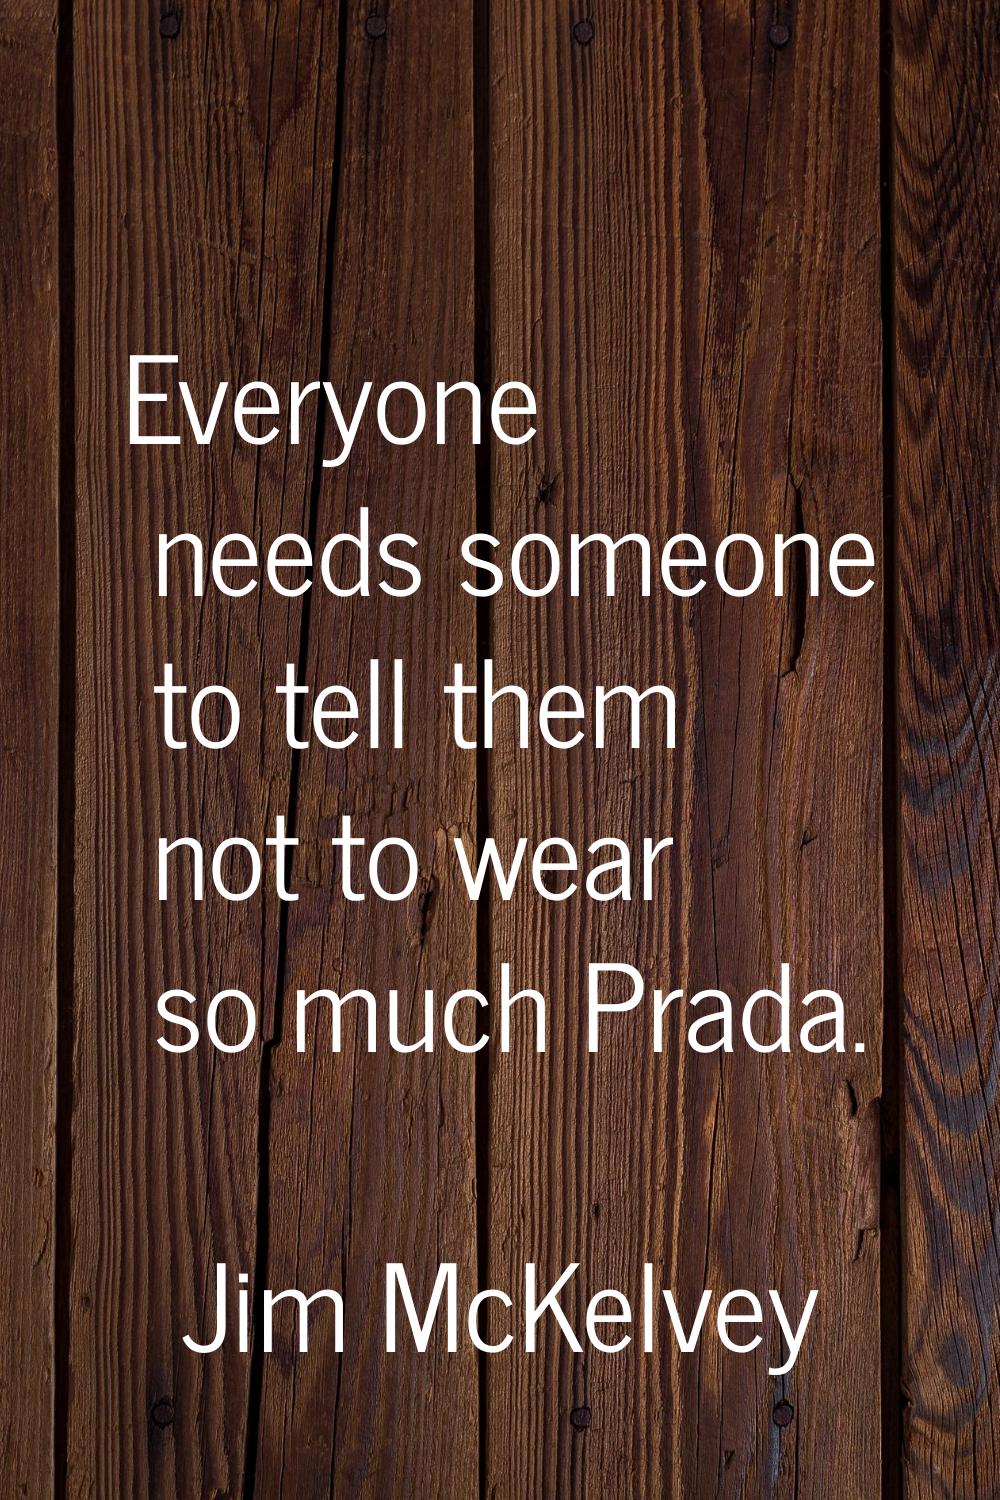 Everyone needs someone to tell them not to wear so much Prada.